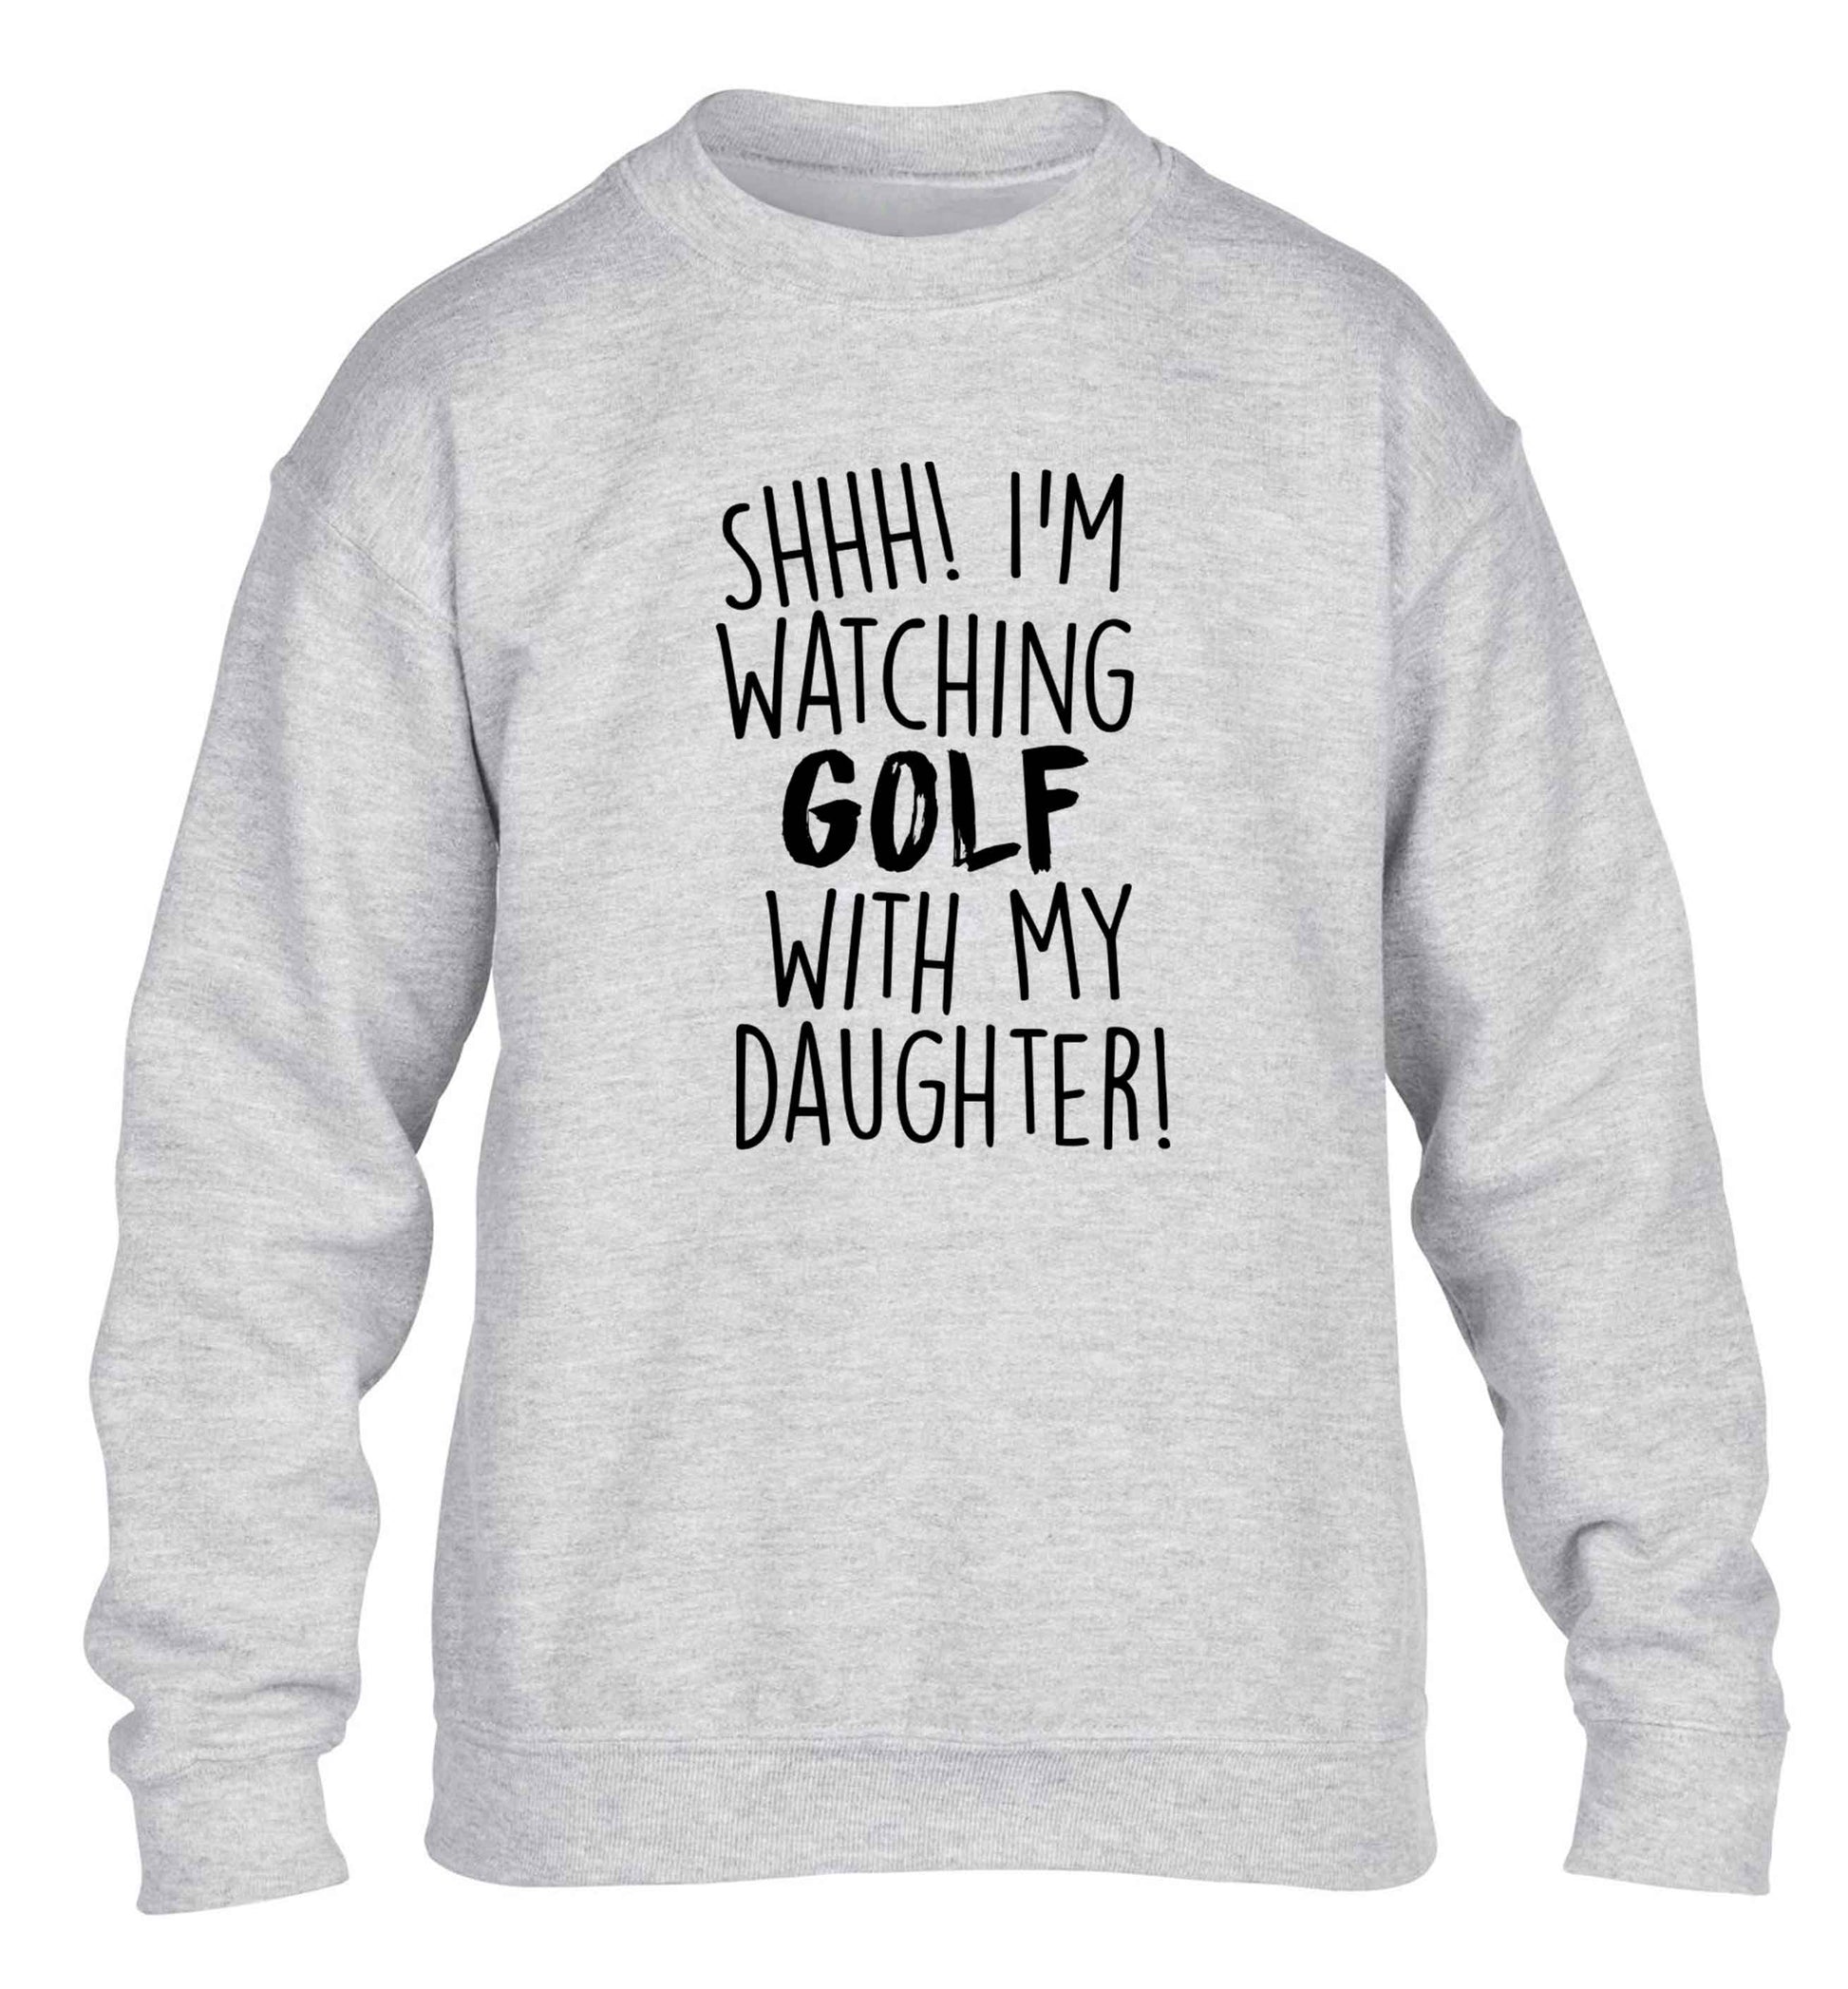 Shh I'm watching golf with my daughter children's grey sweater 12-13 Years